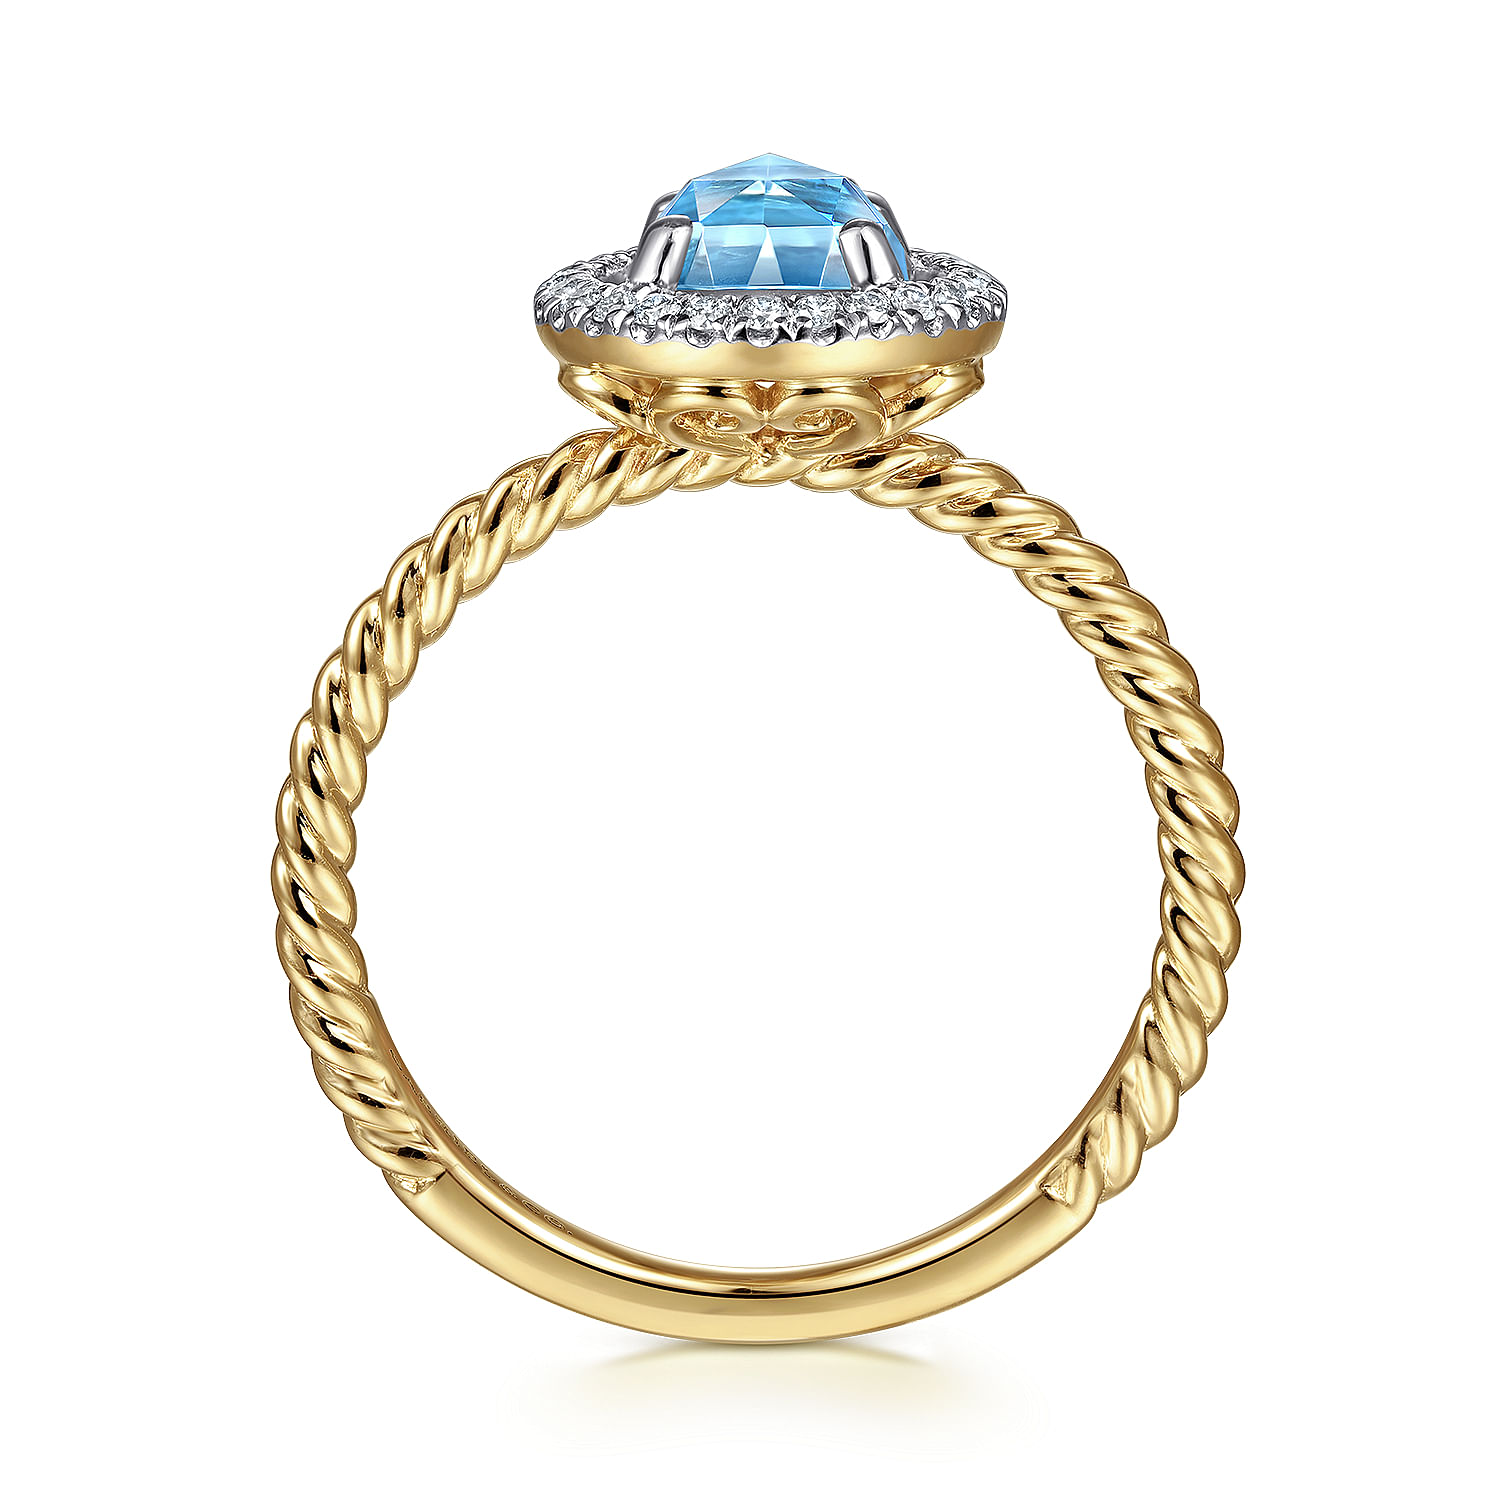 14K Yellow Gold Round Blue Topaz and Floating Diamond Halo Ring